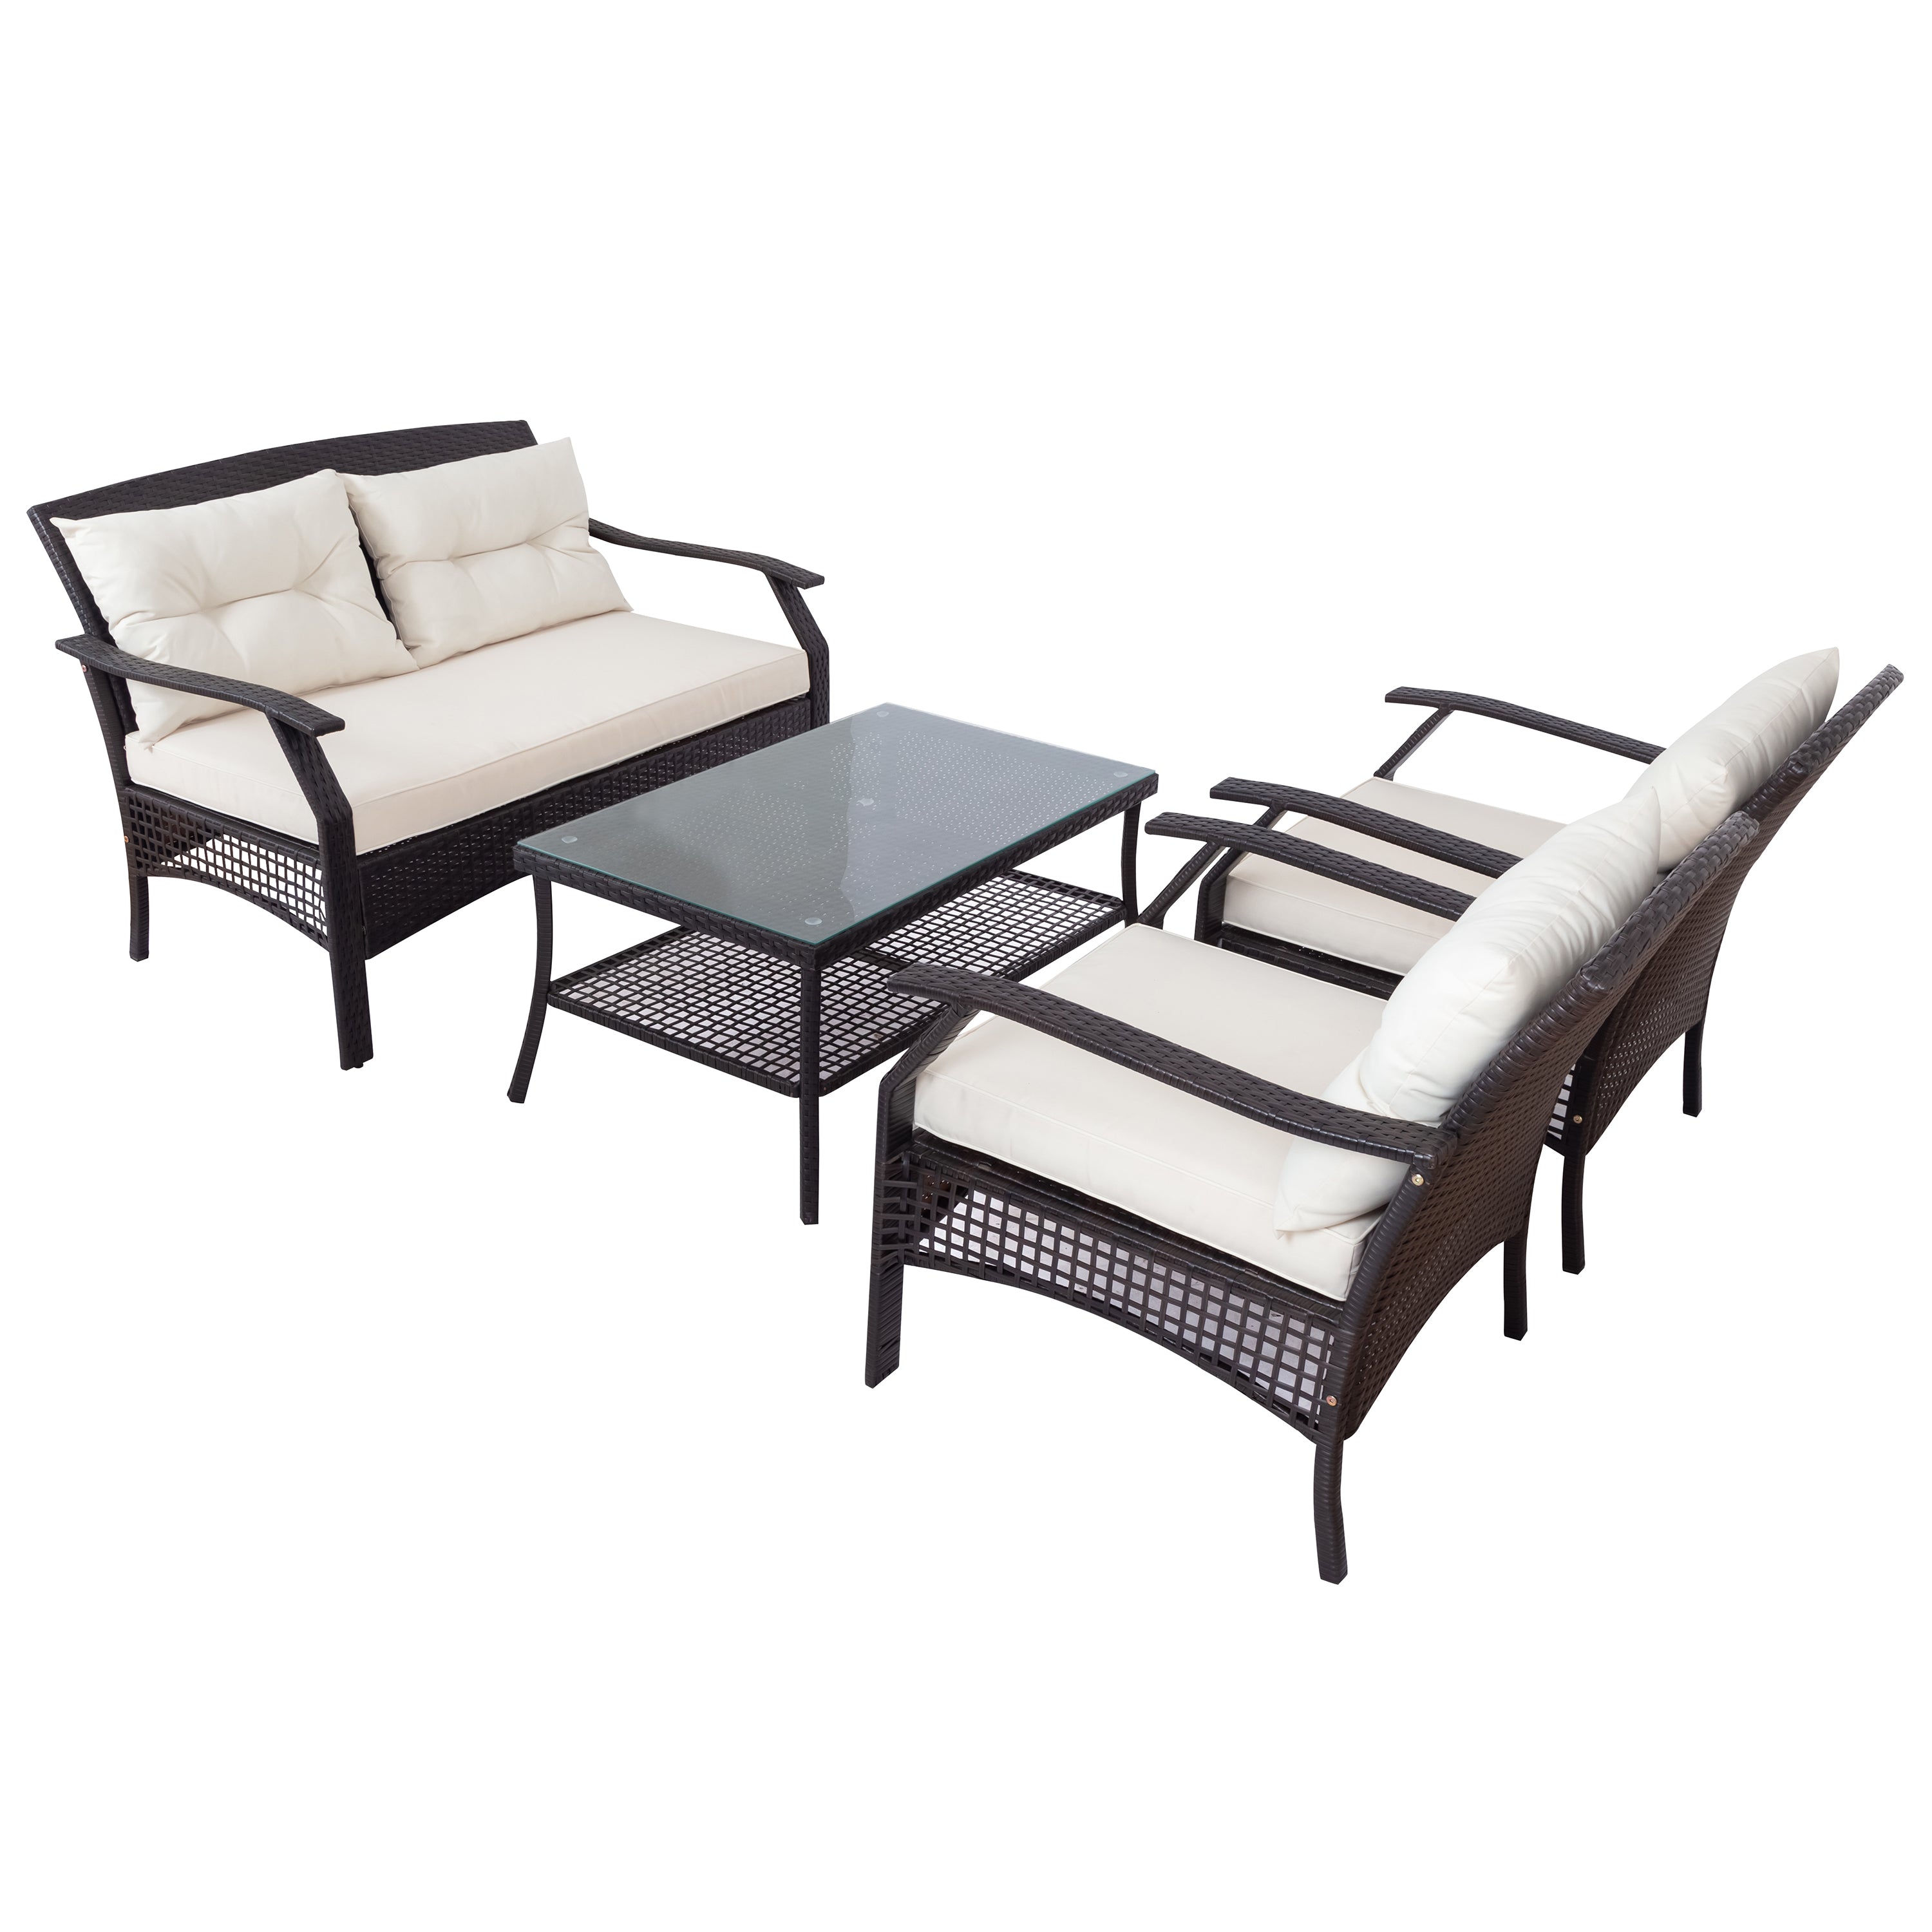 4 Piece Rattan Sofa Seating Group with Beige Cushions, Outdoor Ratten sofa-Boyel Living